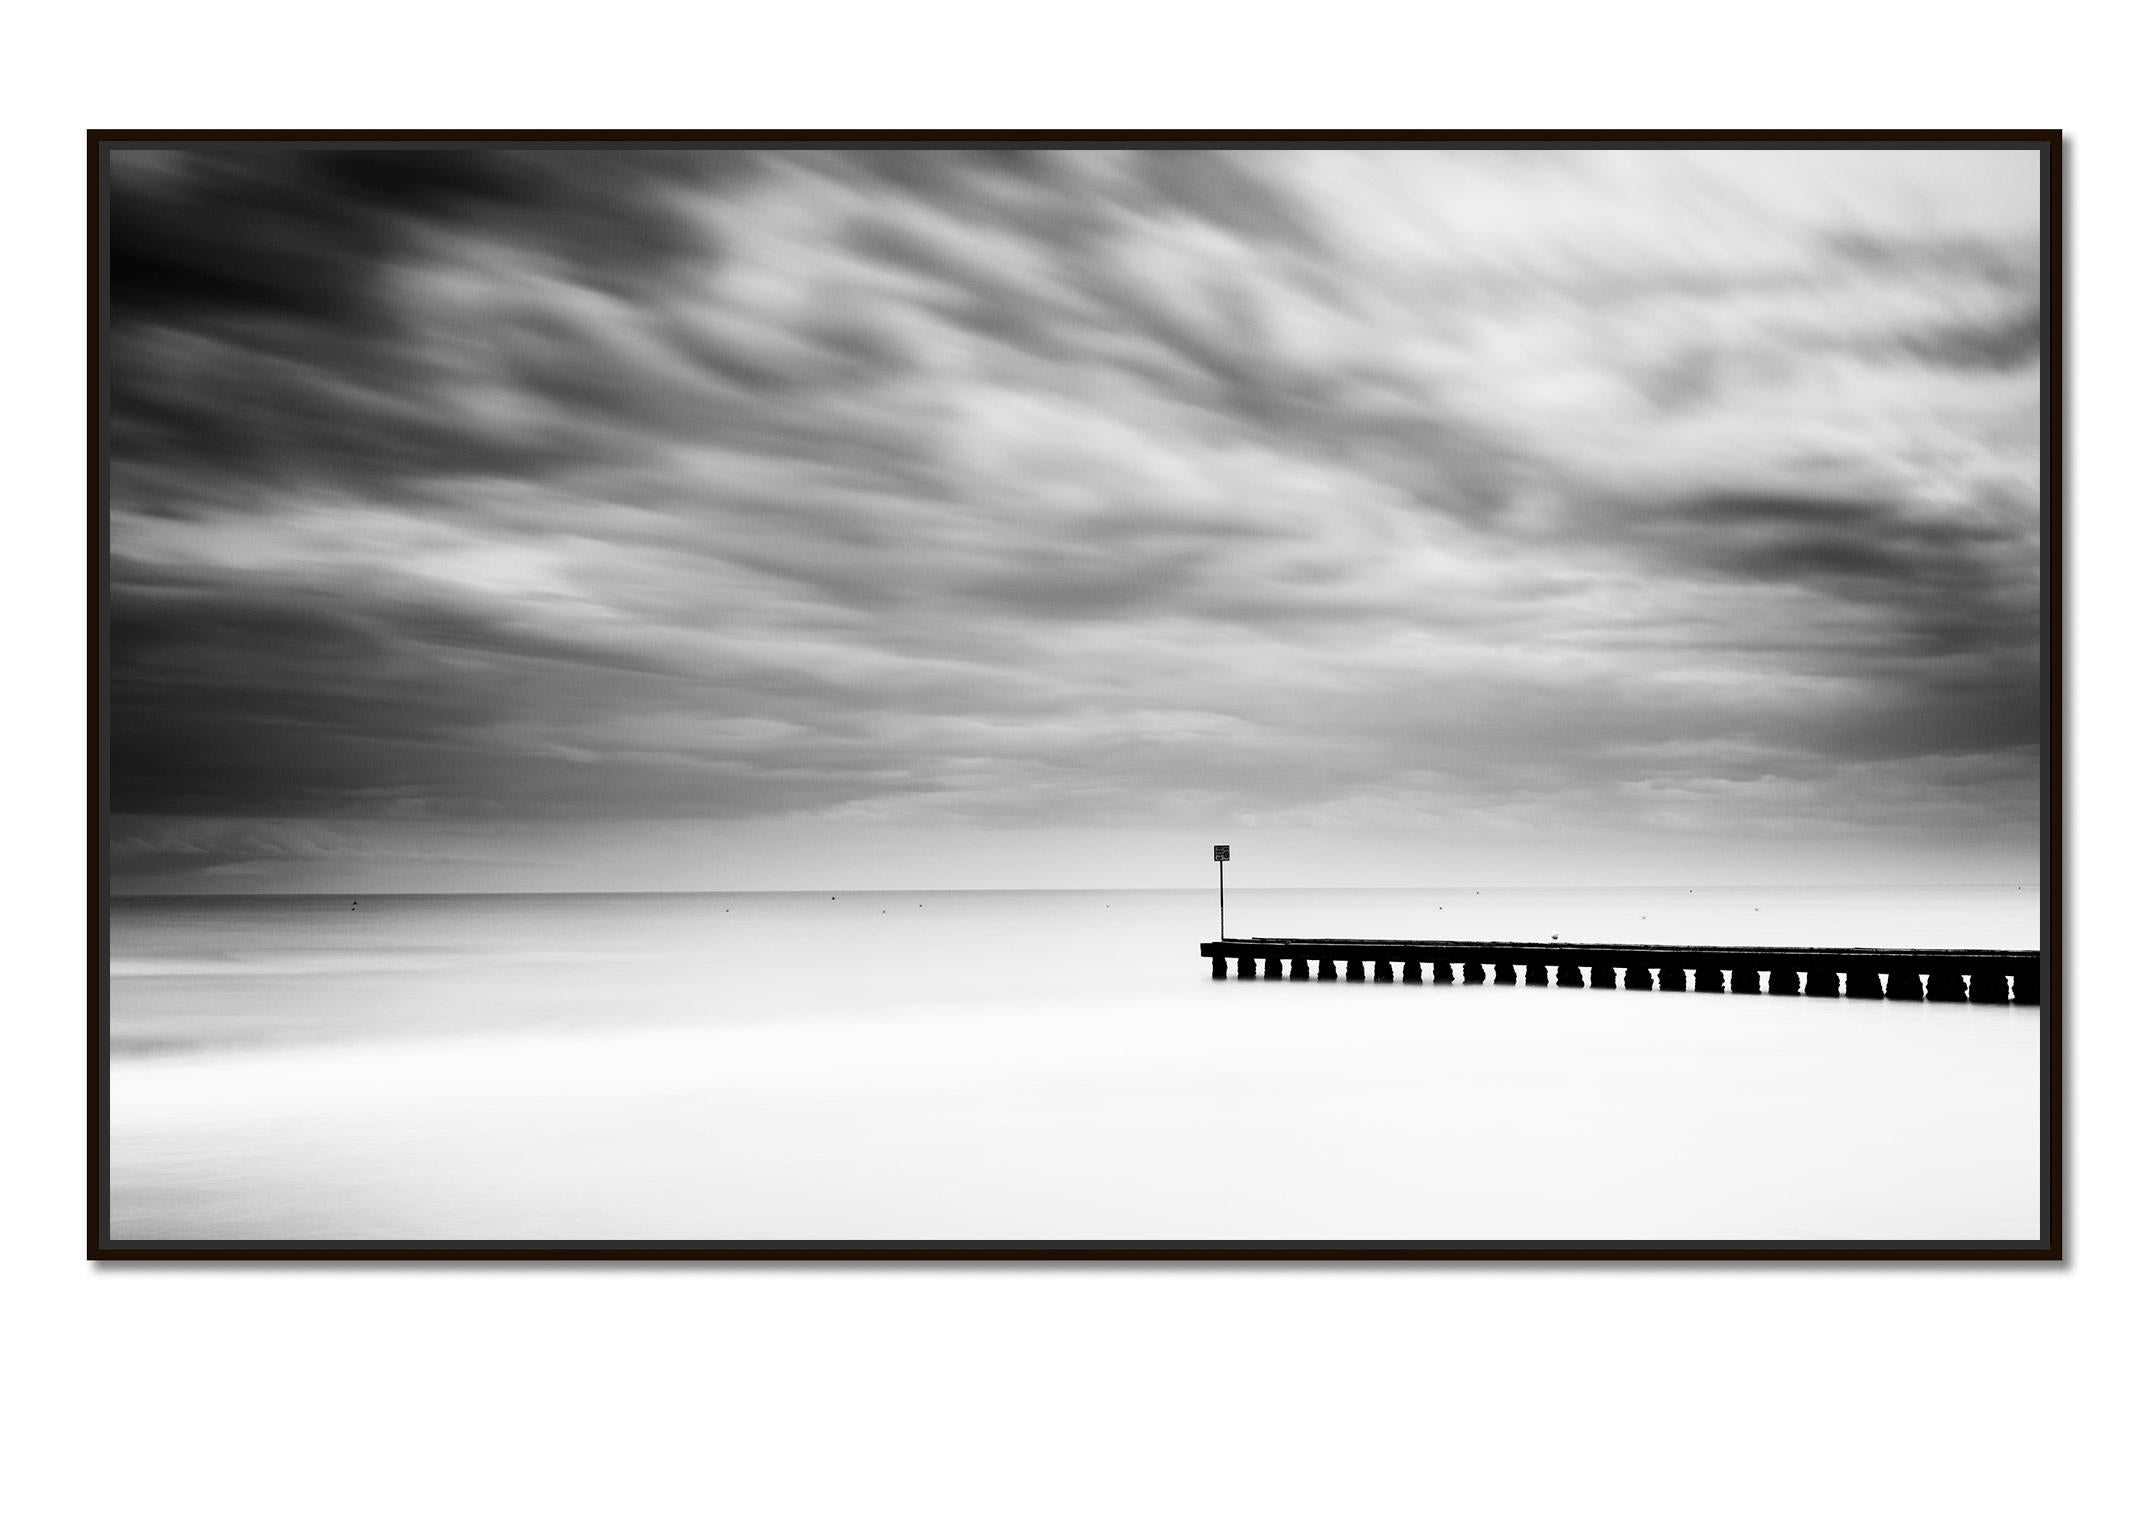 Wooden Pier in the Sea, Panorama, stormy Weather, black and white landscape - Photograph by Gerald Berghammer